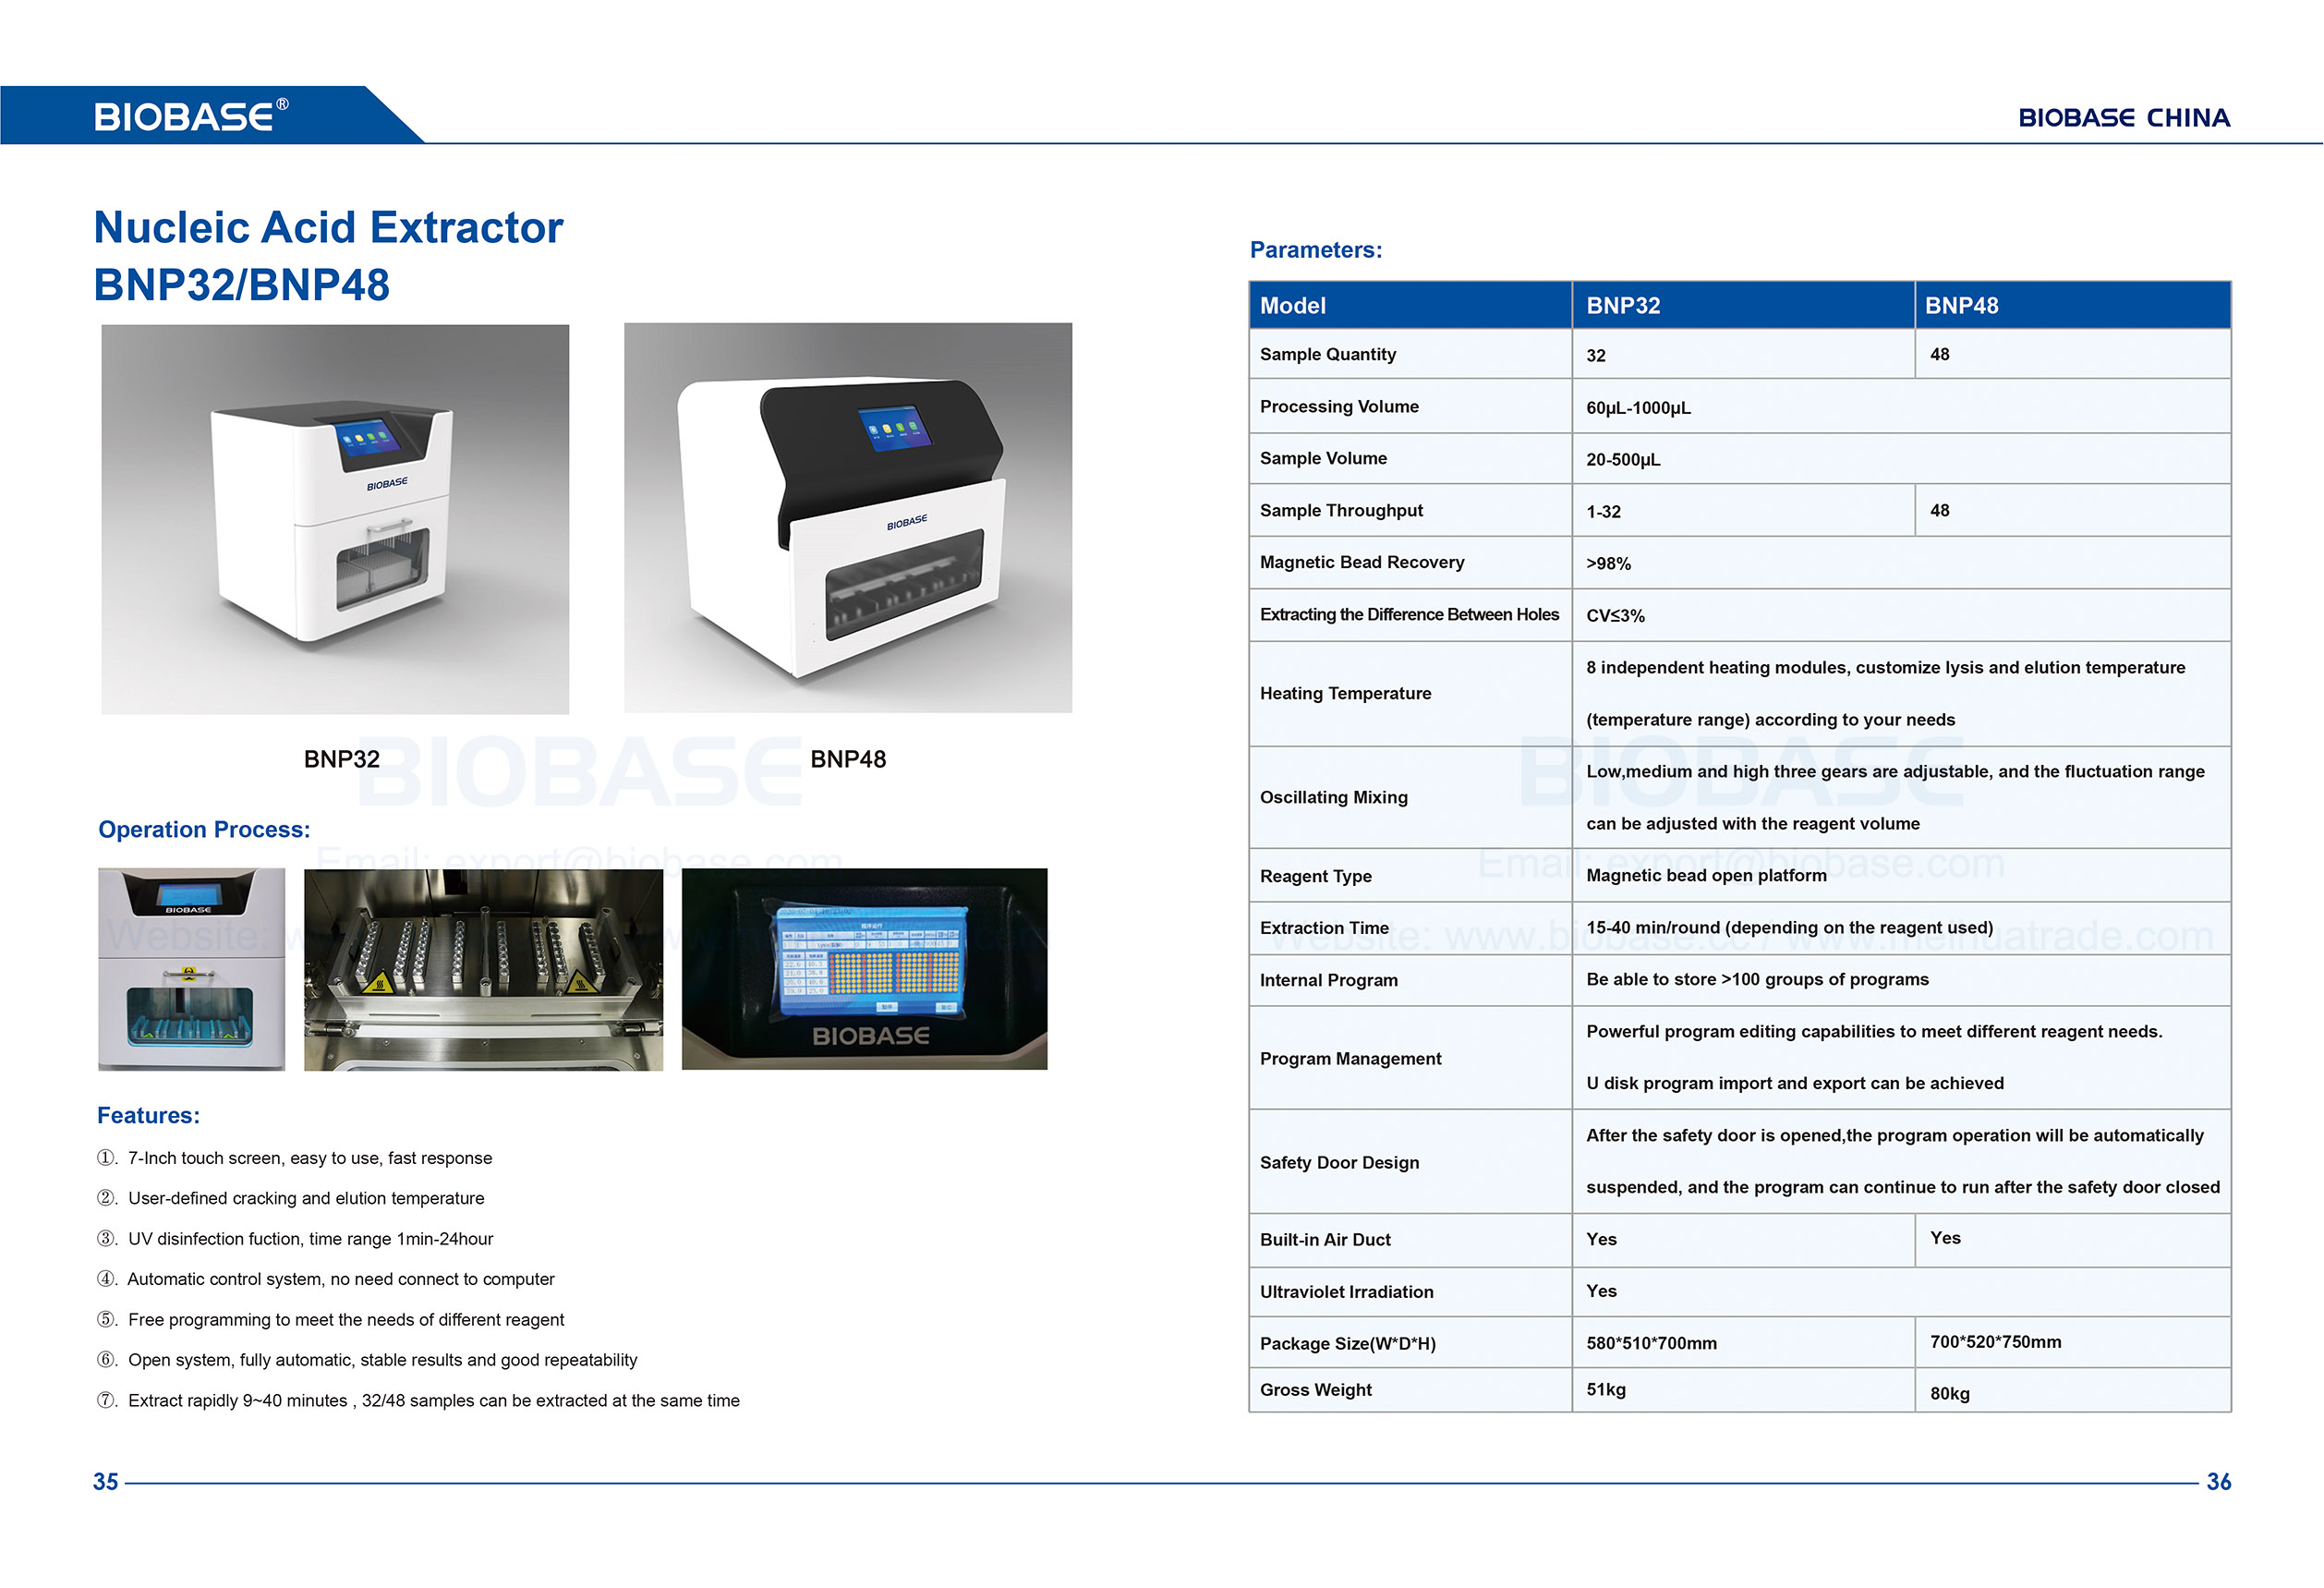 35-36 Nucleic Acid Extraction System-BNP32&BNP48